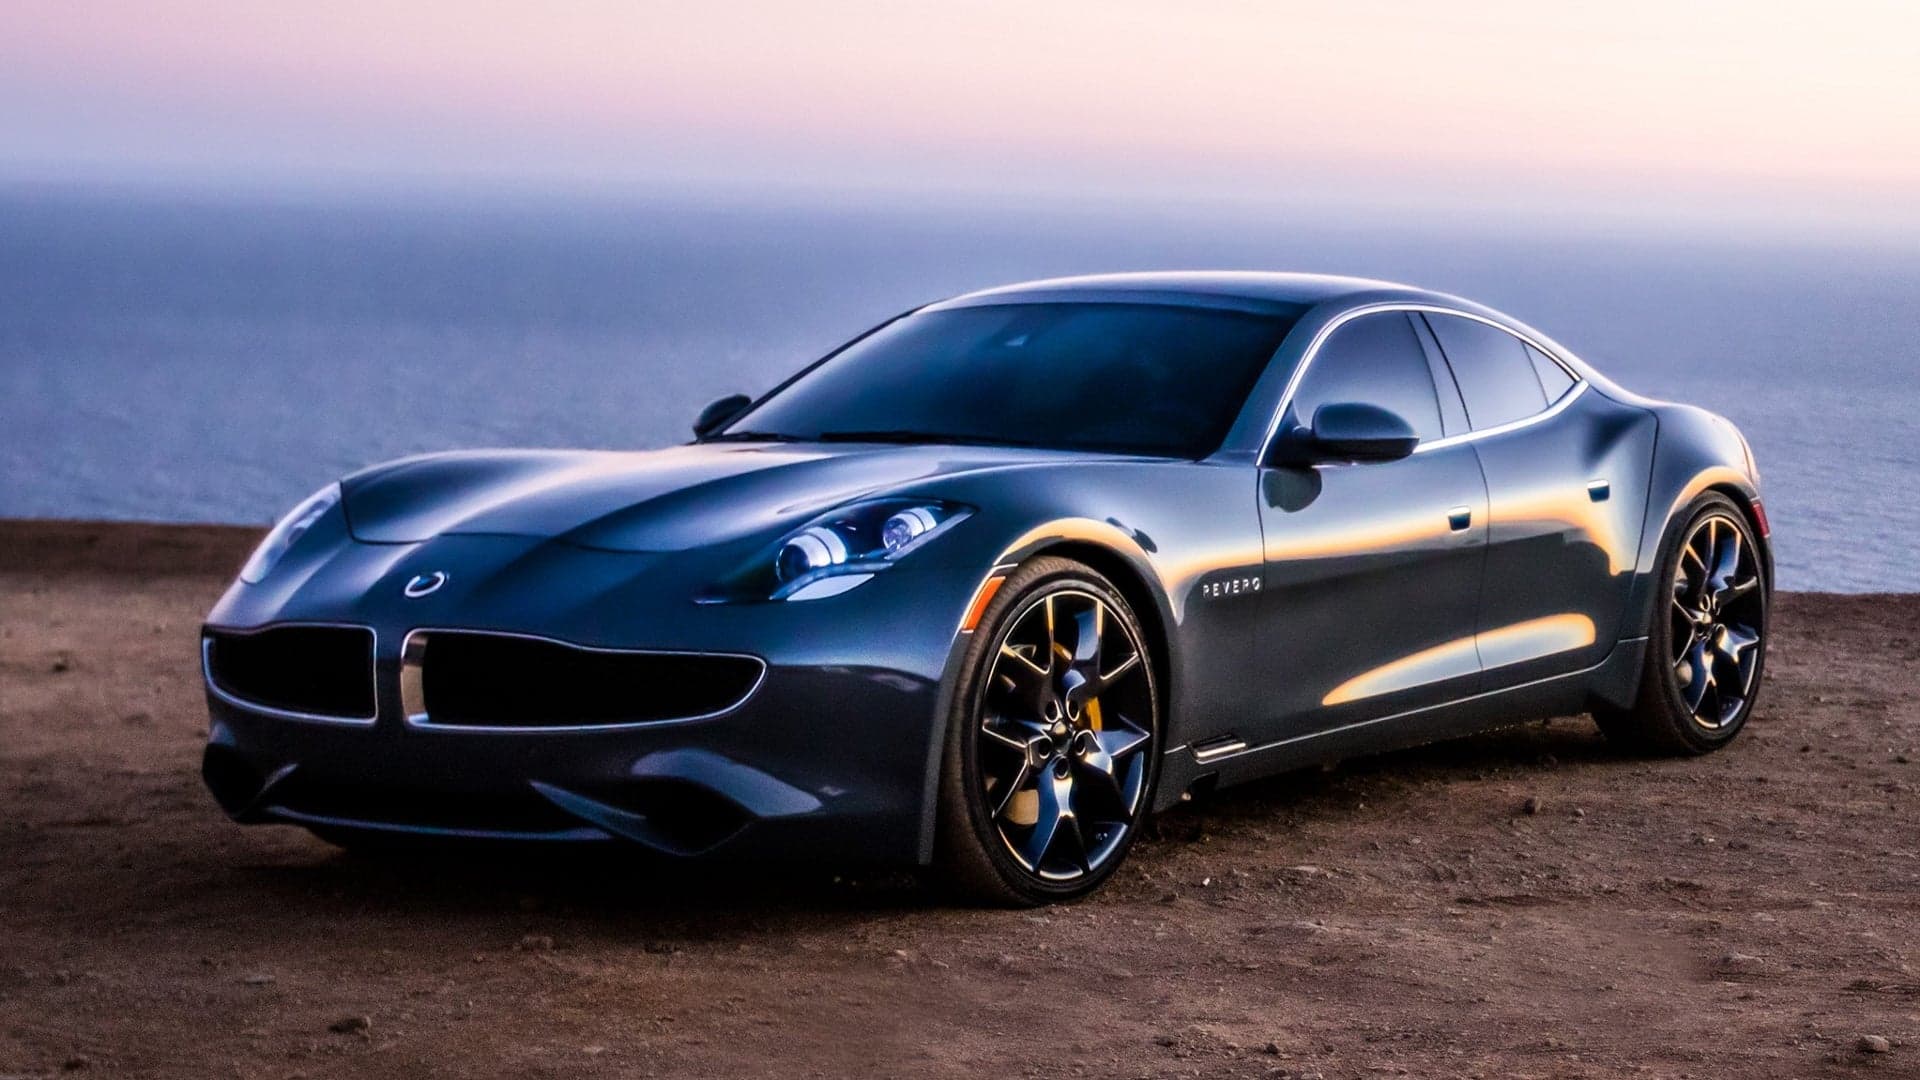 Karma’s Releases First-Ever TV Commercial for the Revero